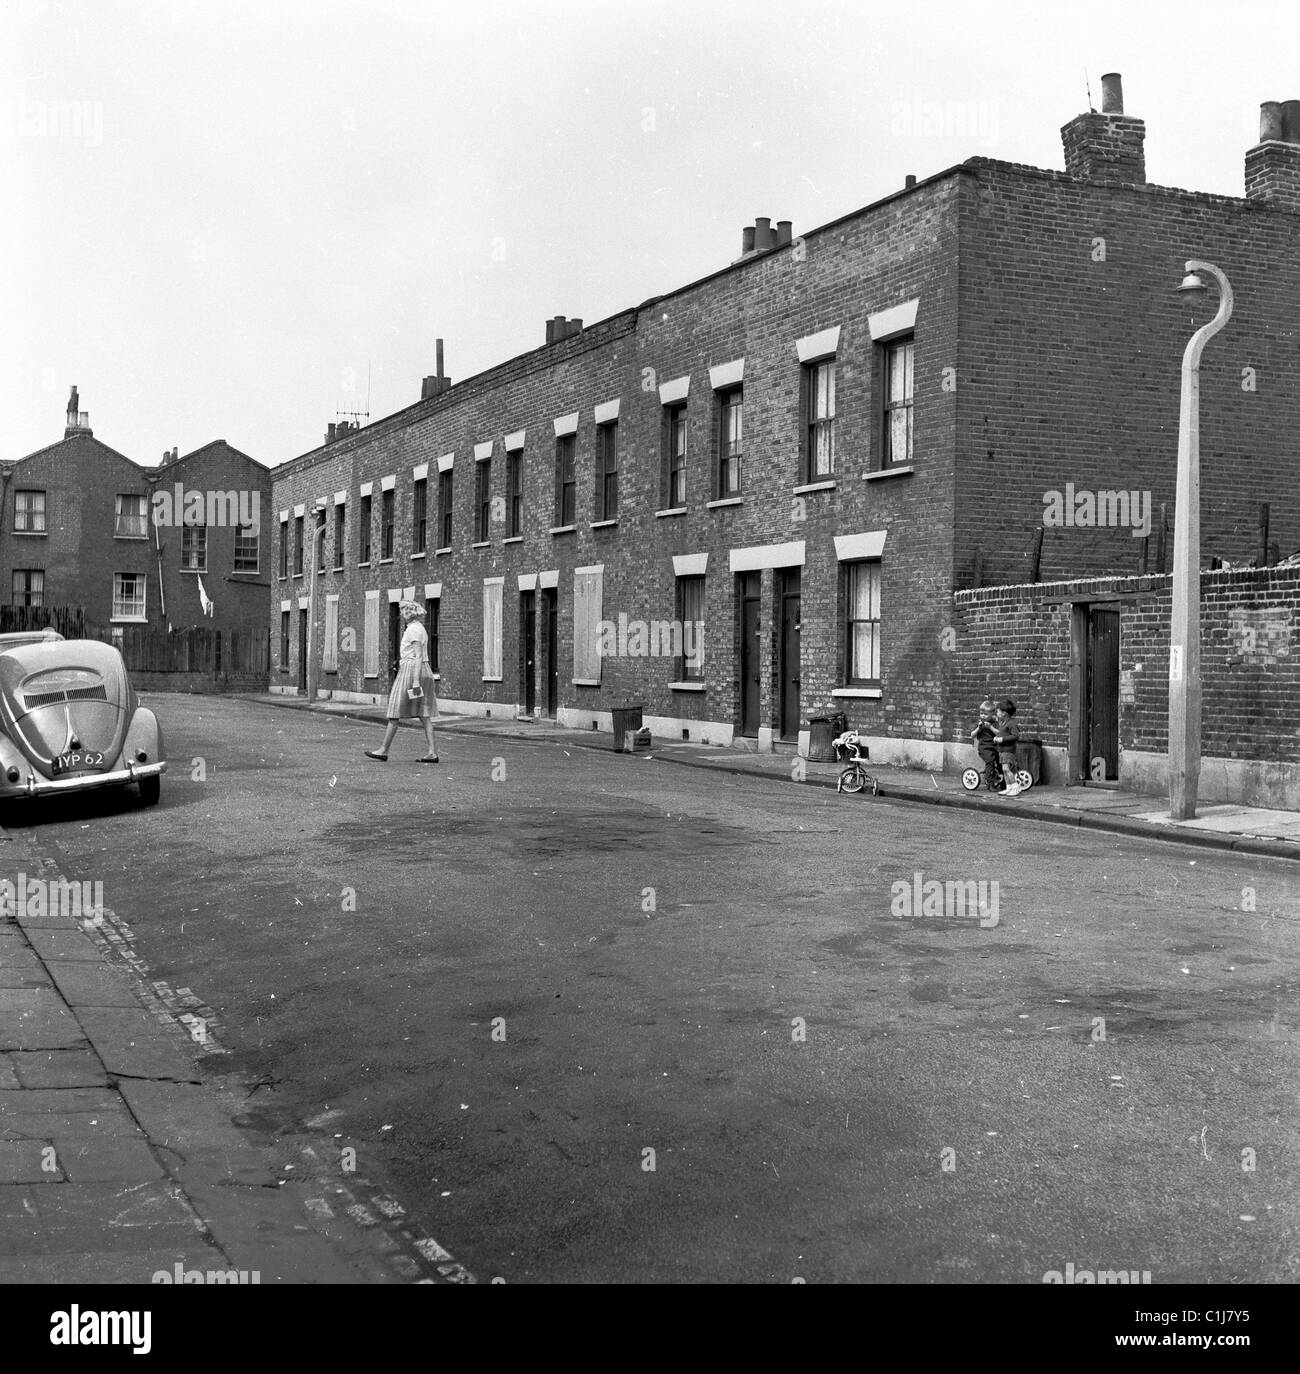 1950s. Historical. Small children play in an empty inner-city London street outside a row of small old victorian terraced houses. Stock Photo